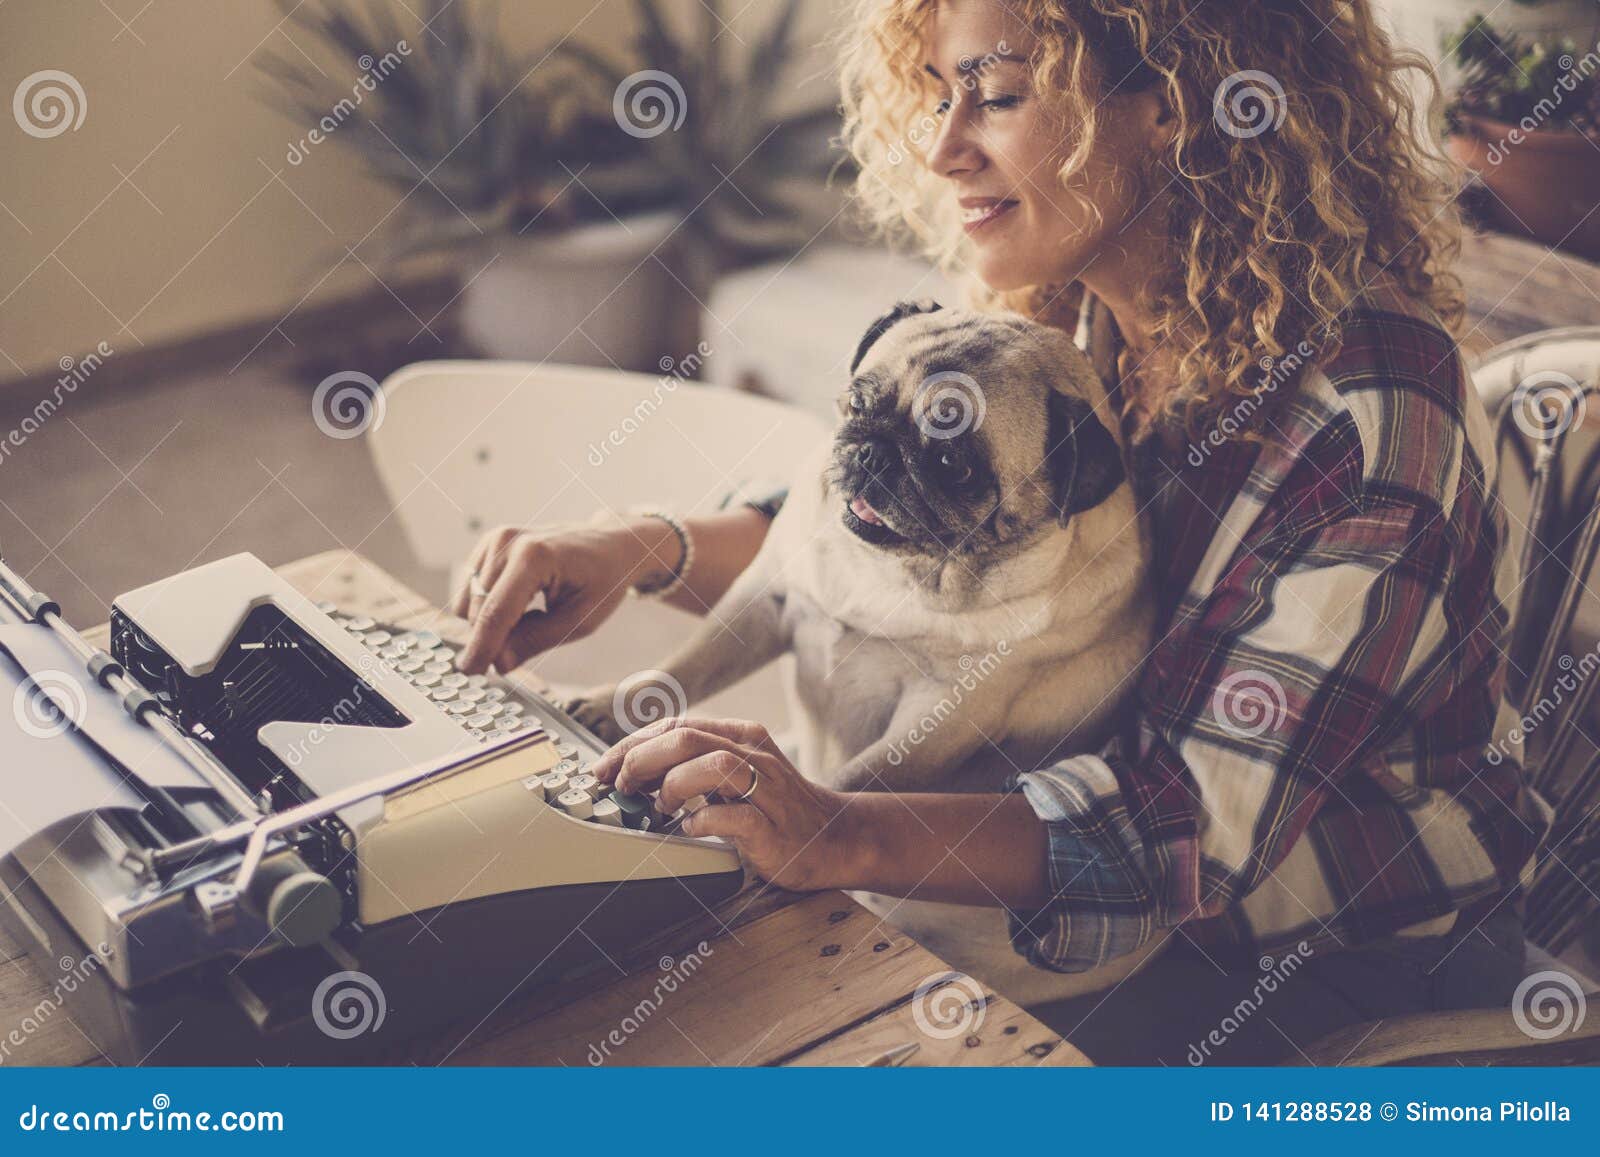 Funny Scene with Beautiful Hipster Curly Blonde Lady Working and Typing on  Old Typewriter Writing a Blog or Book while Her Best Stock Photo - Image of  house, mother: 141288528